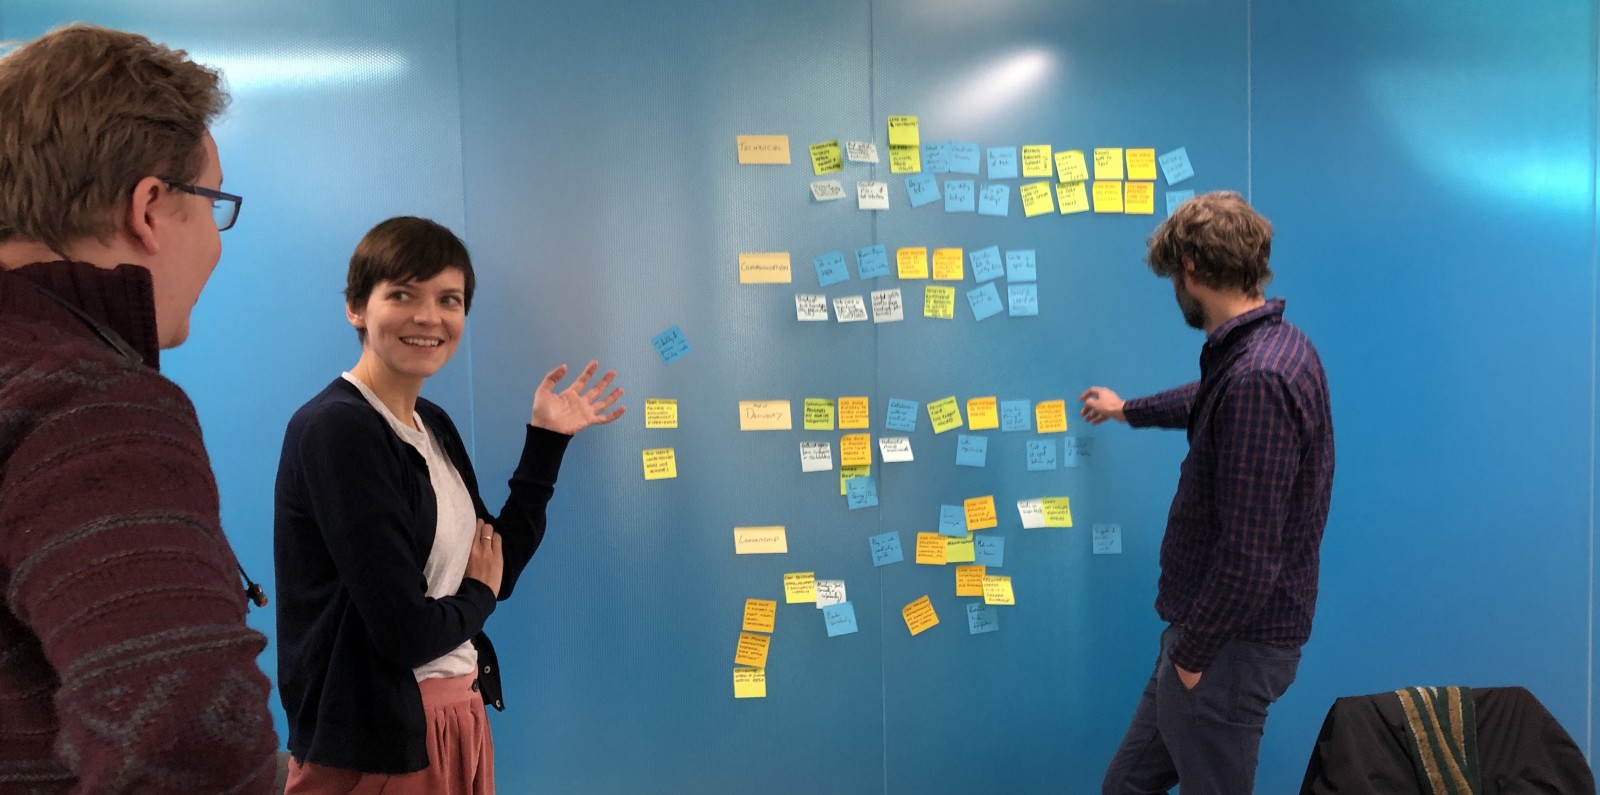 A spirited discussion about career competencies — complete with Post-it notes